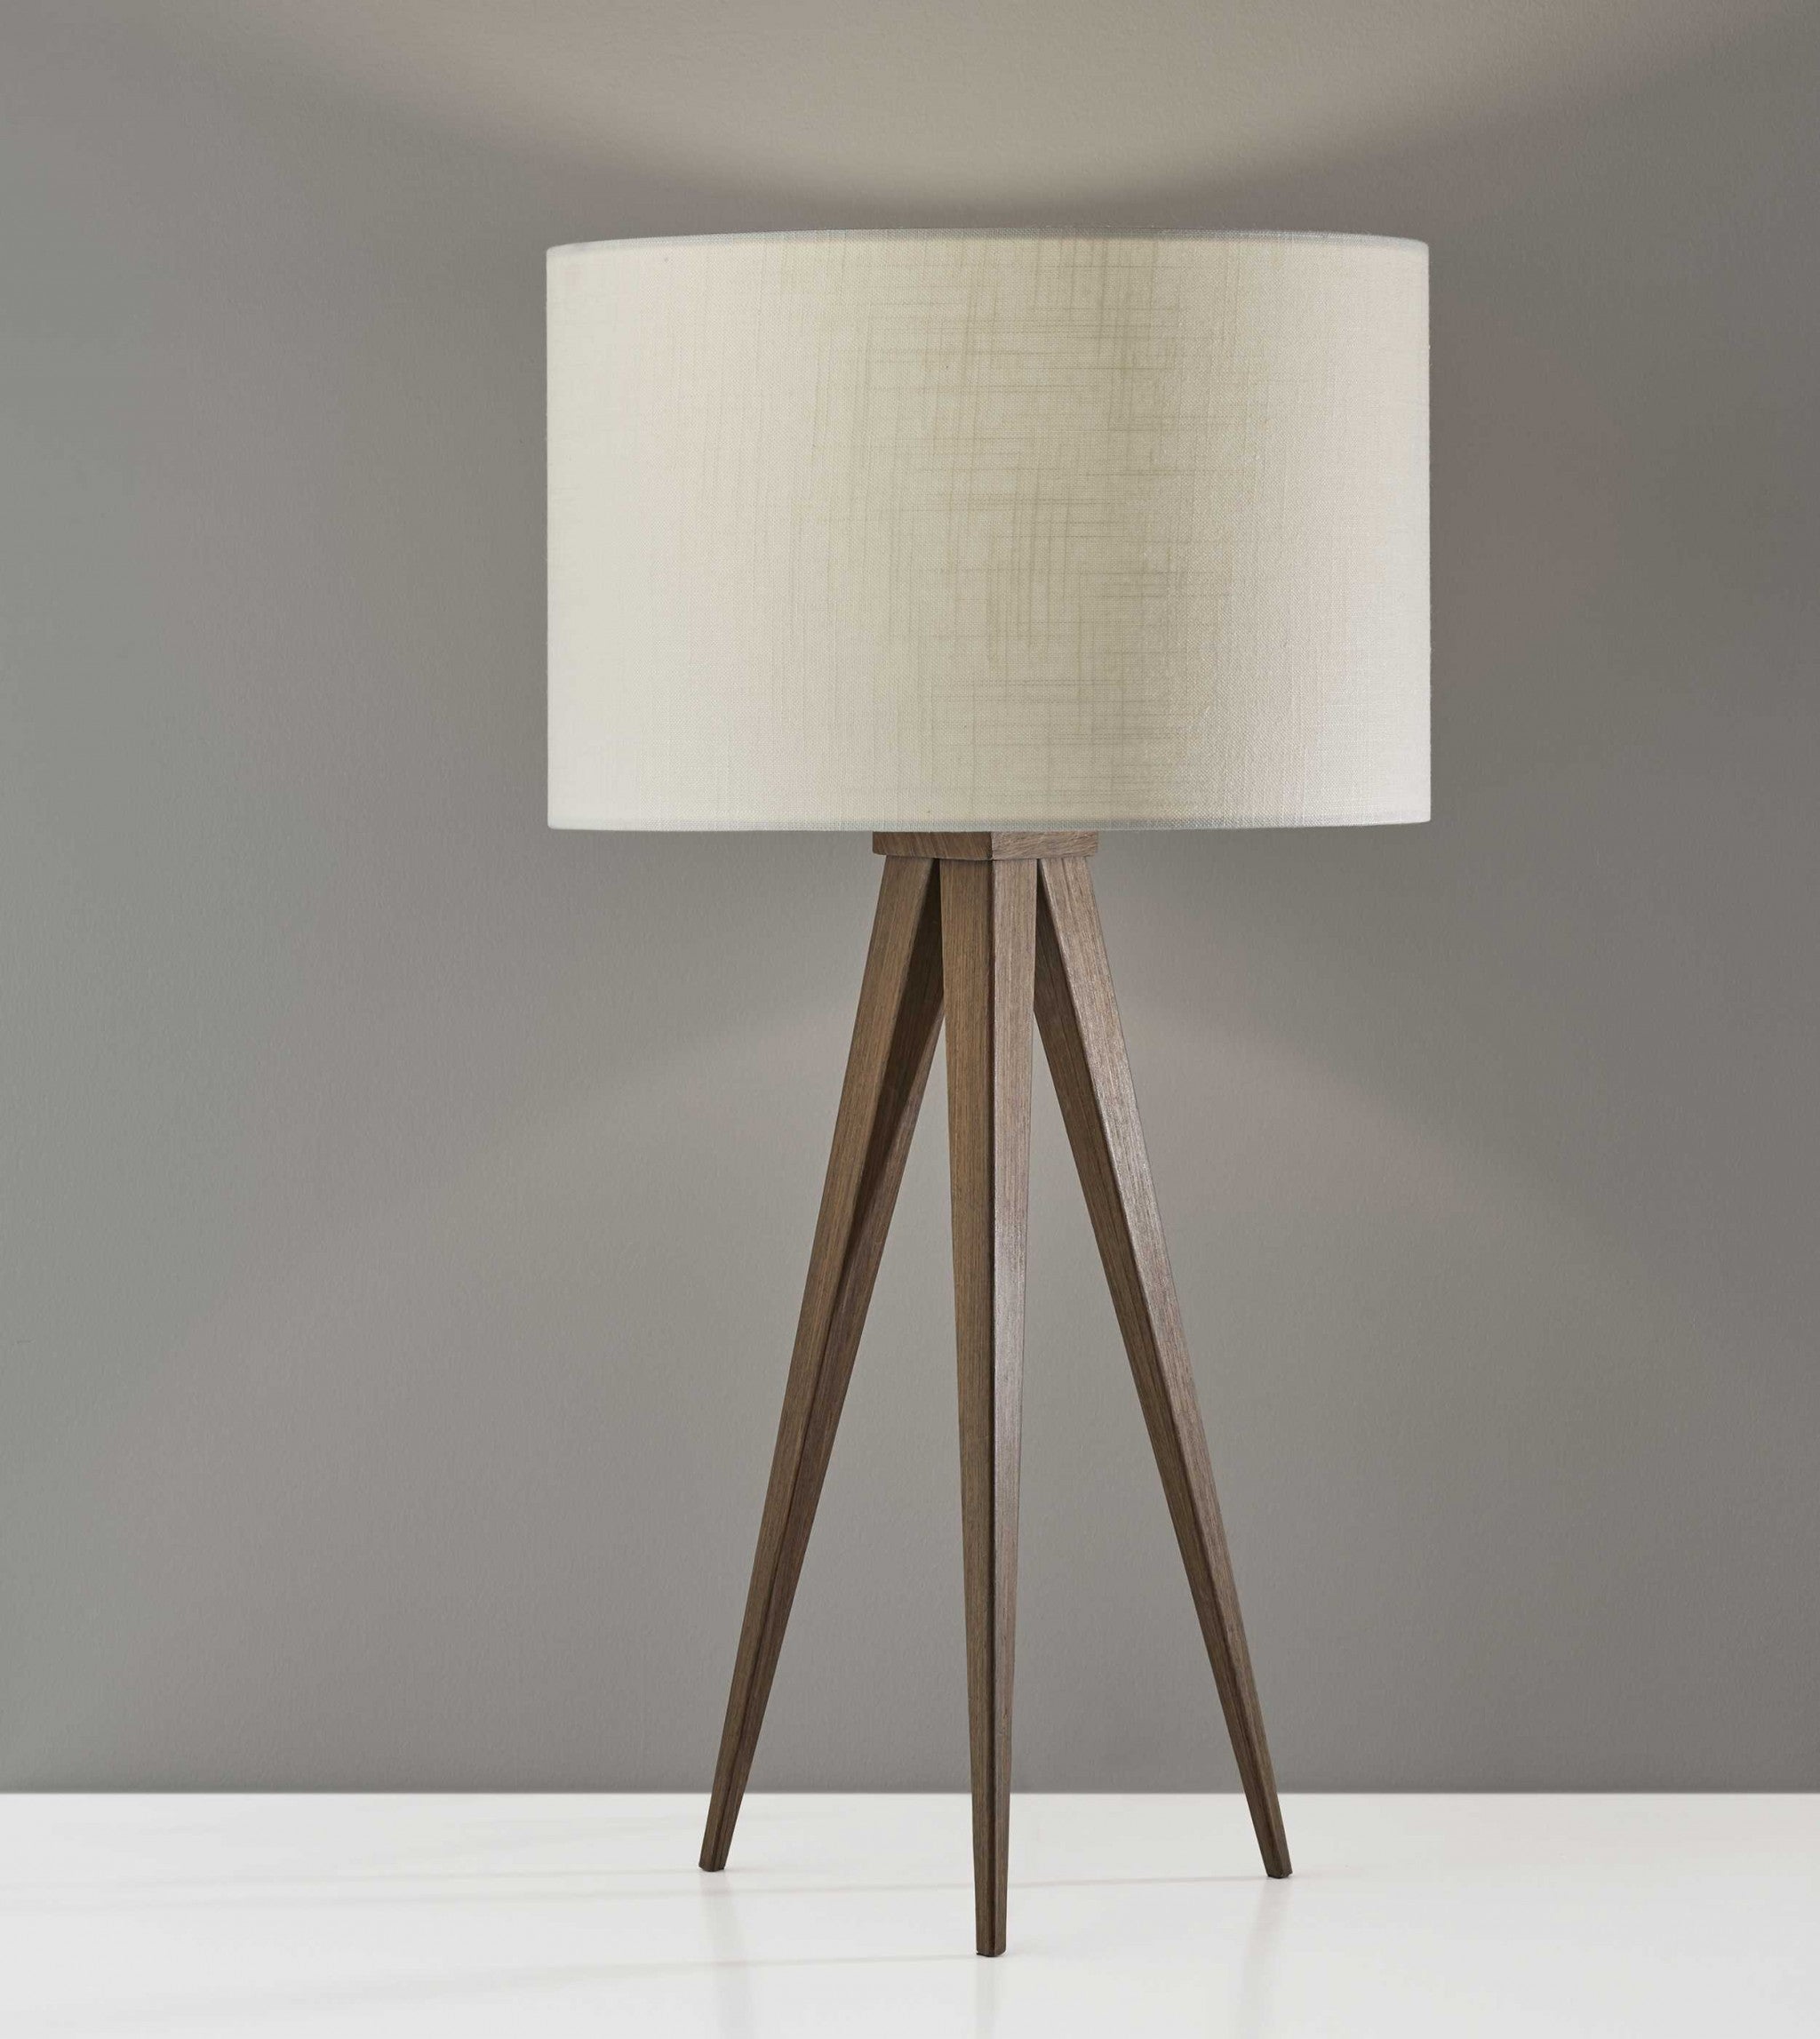 26" Tripod Floor Lamp With White Drum Shade